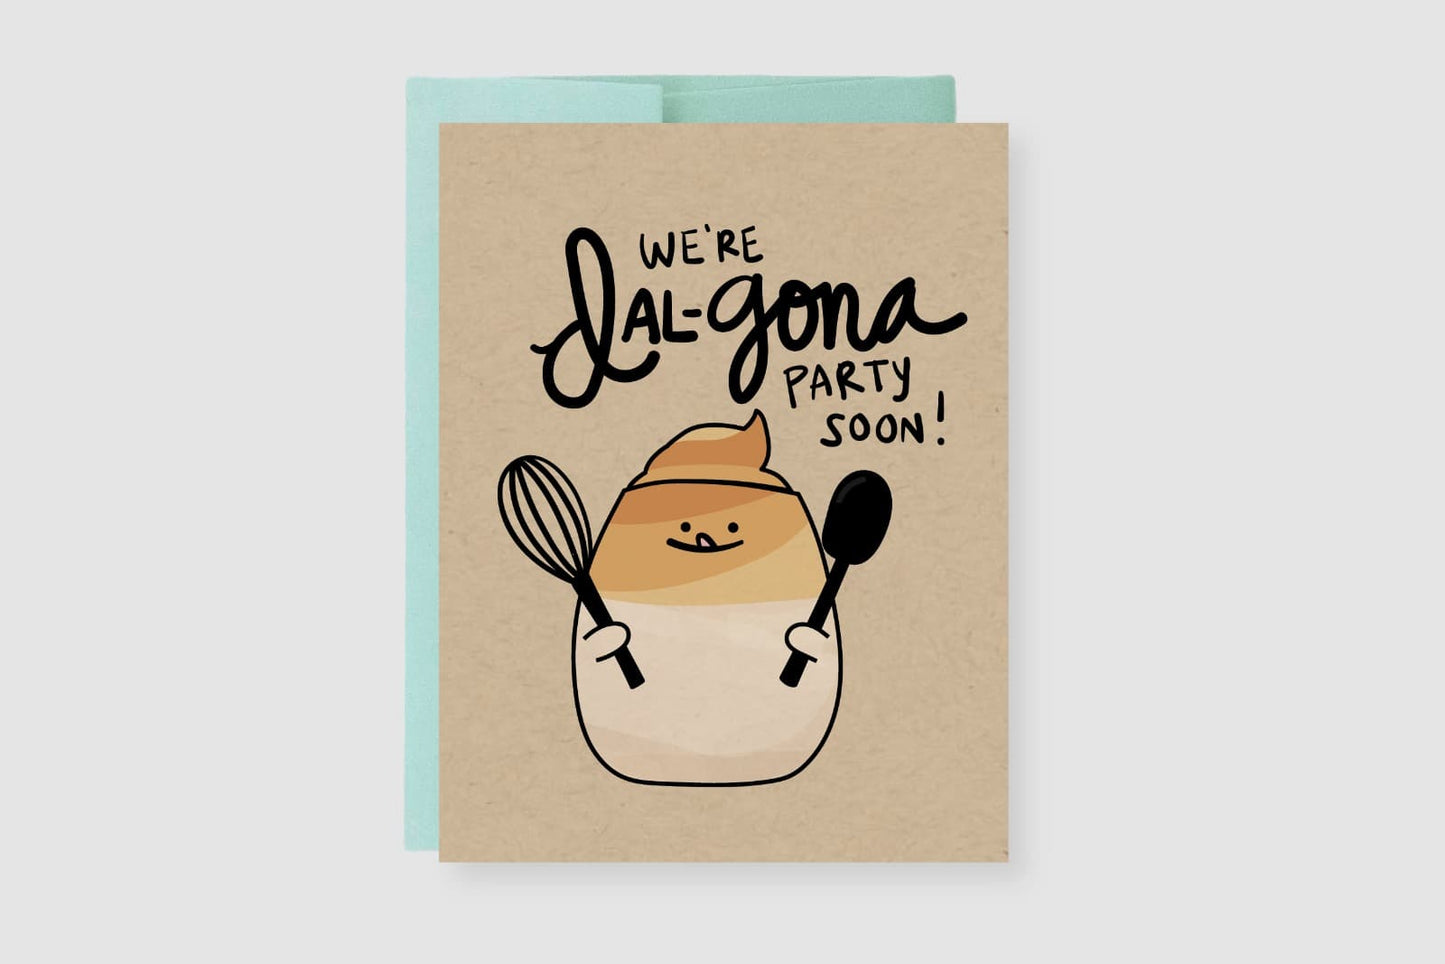 We're Dal-gona Party Soon Greeting Card